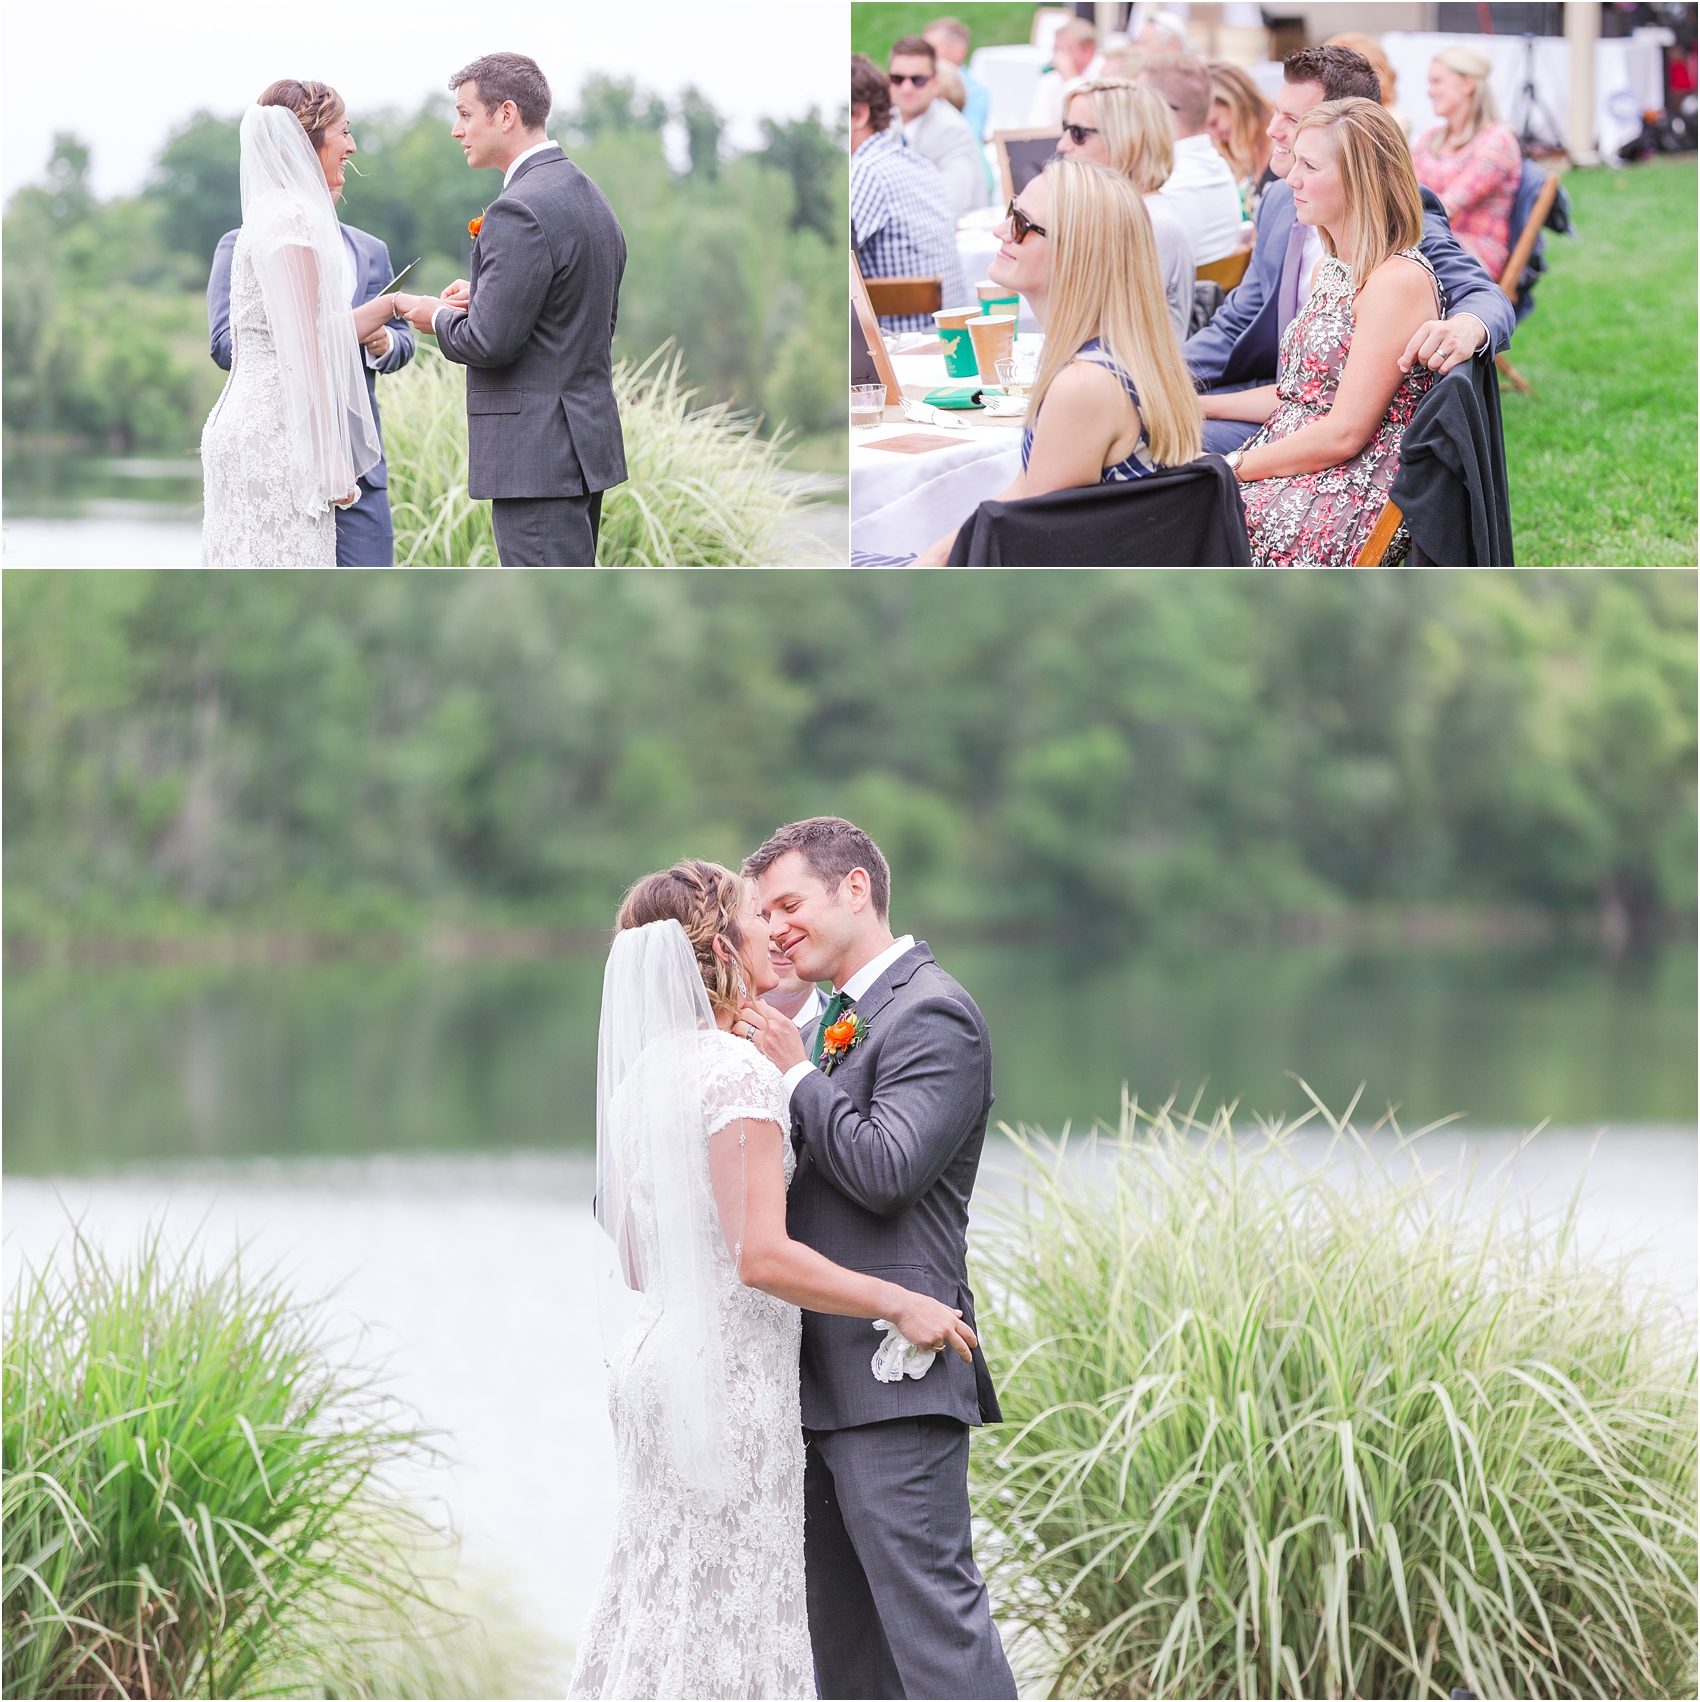 romantic-intimate-backyard-wedding-photos-at-private-estate-in-ann-arbor-mi-by-courtney-carolyn-photography_0108.jpg